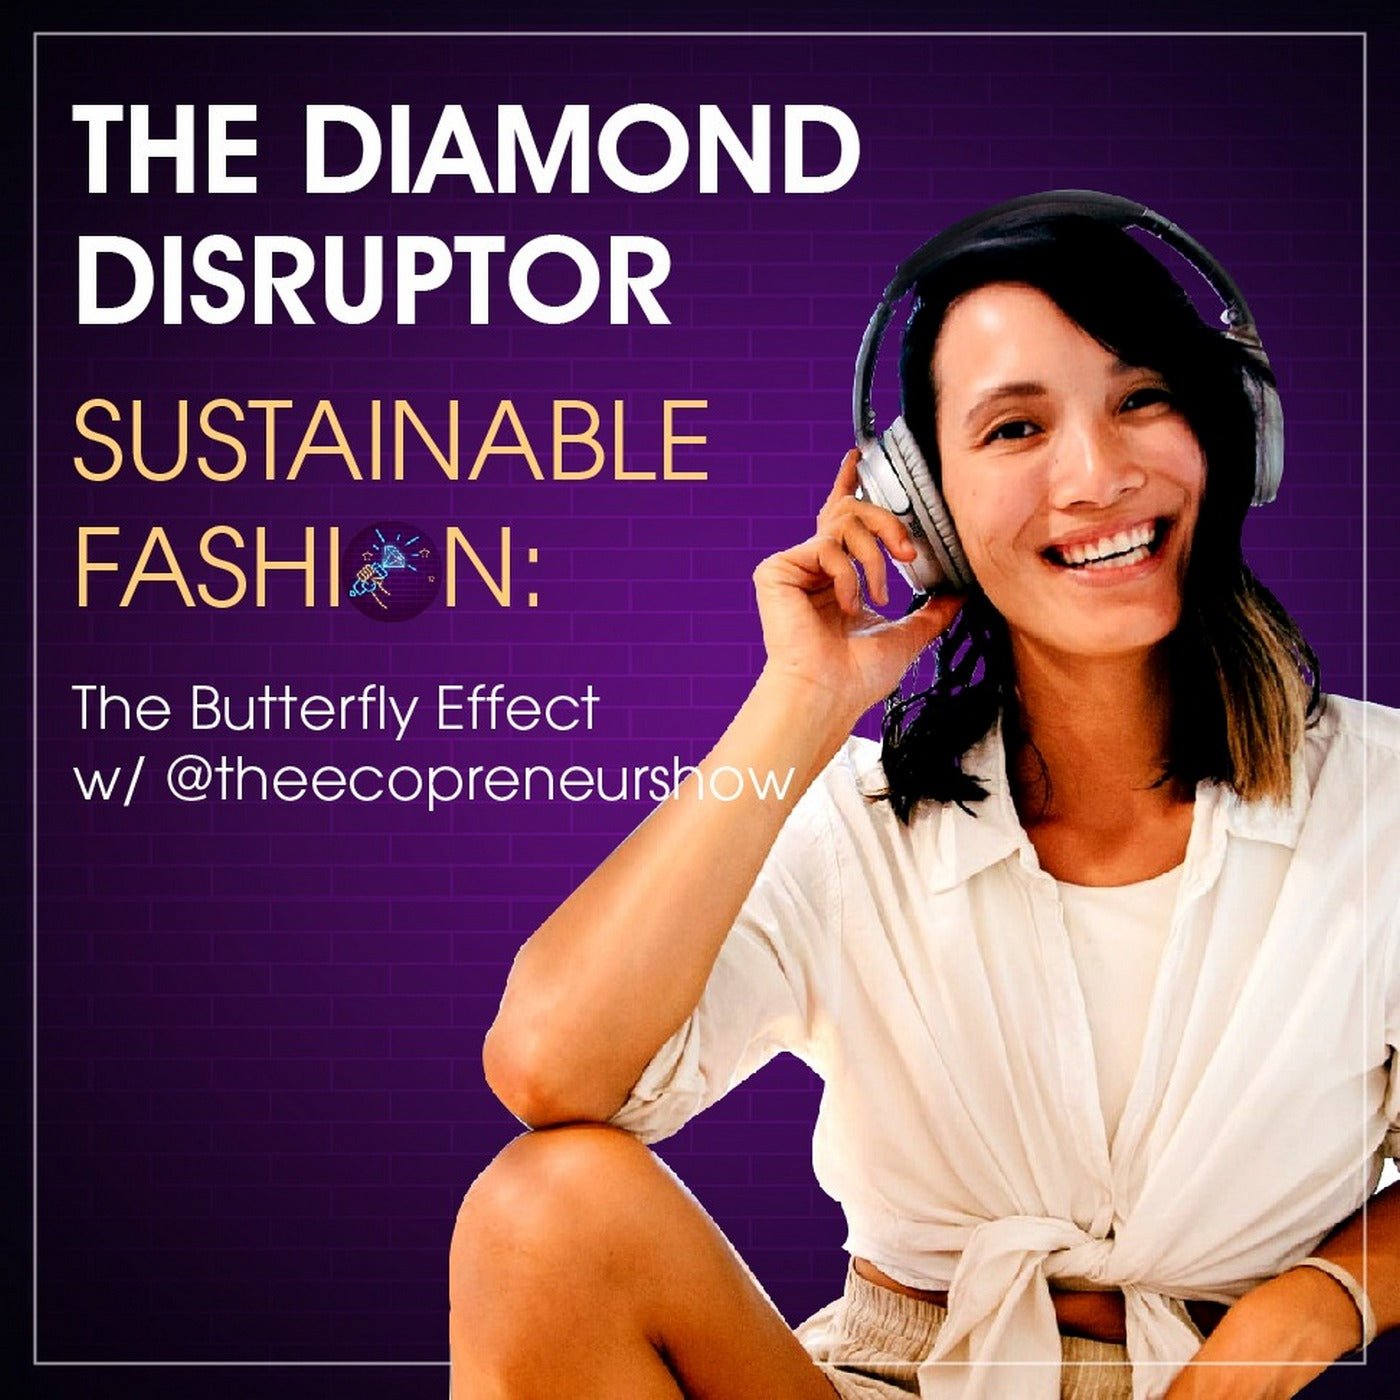 New Diamond Disruptor podcast out - Sustainability and The Butterfly Effect 🦋 | Lark and Berry